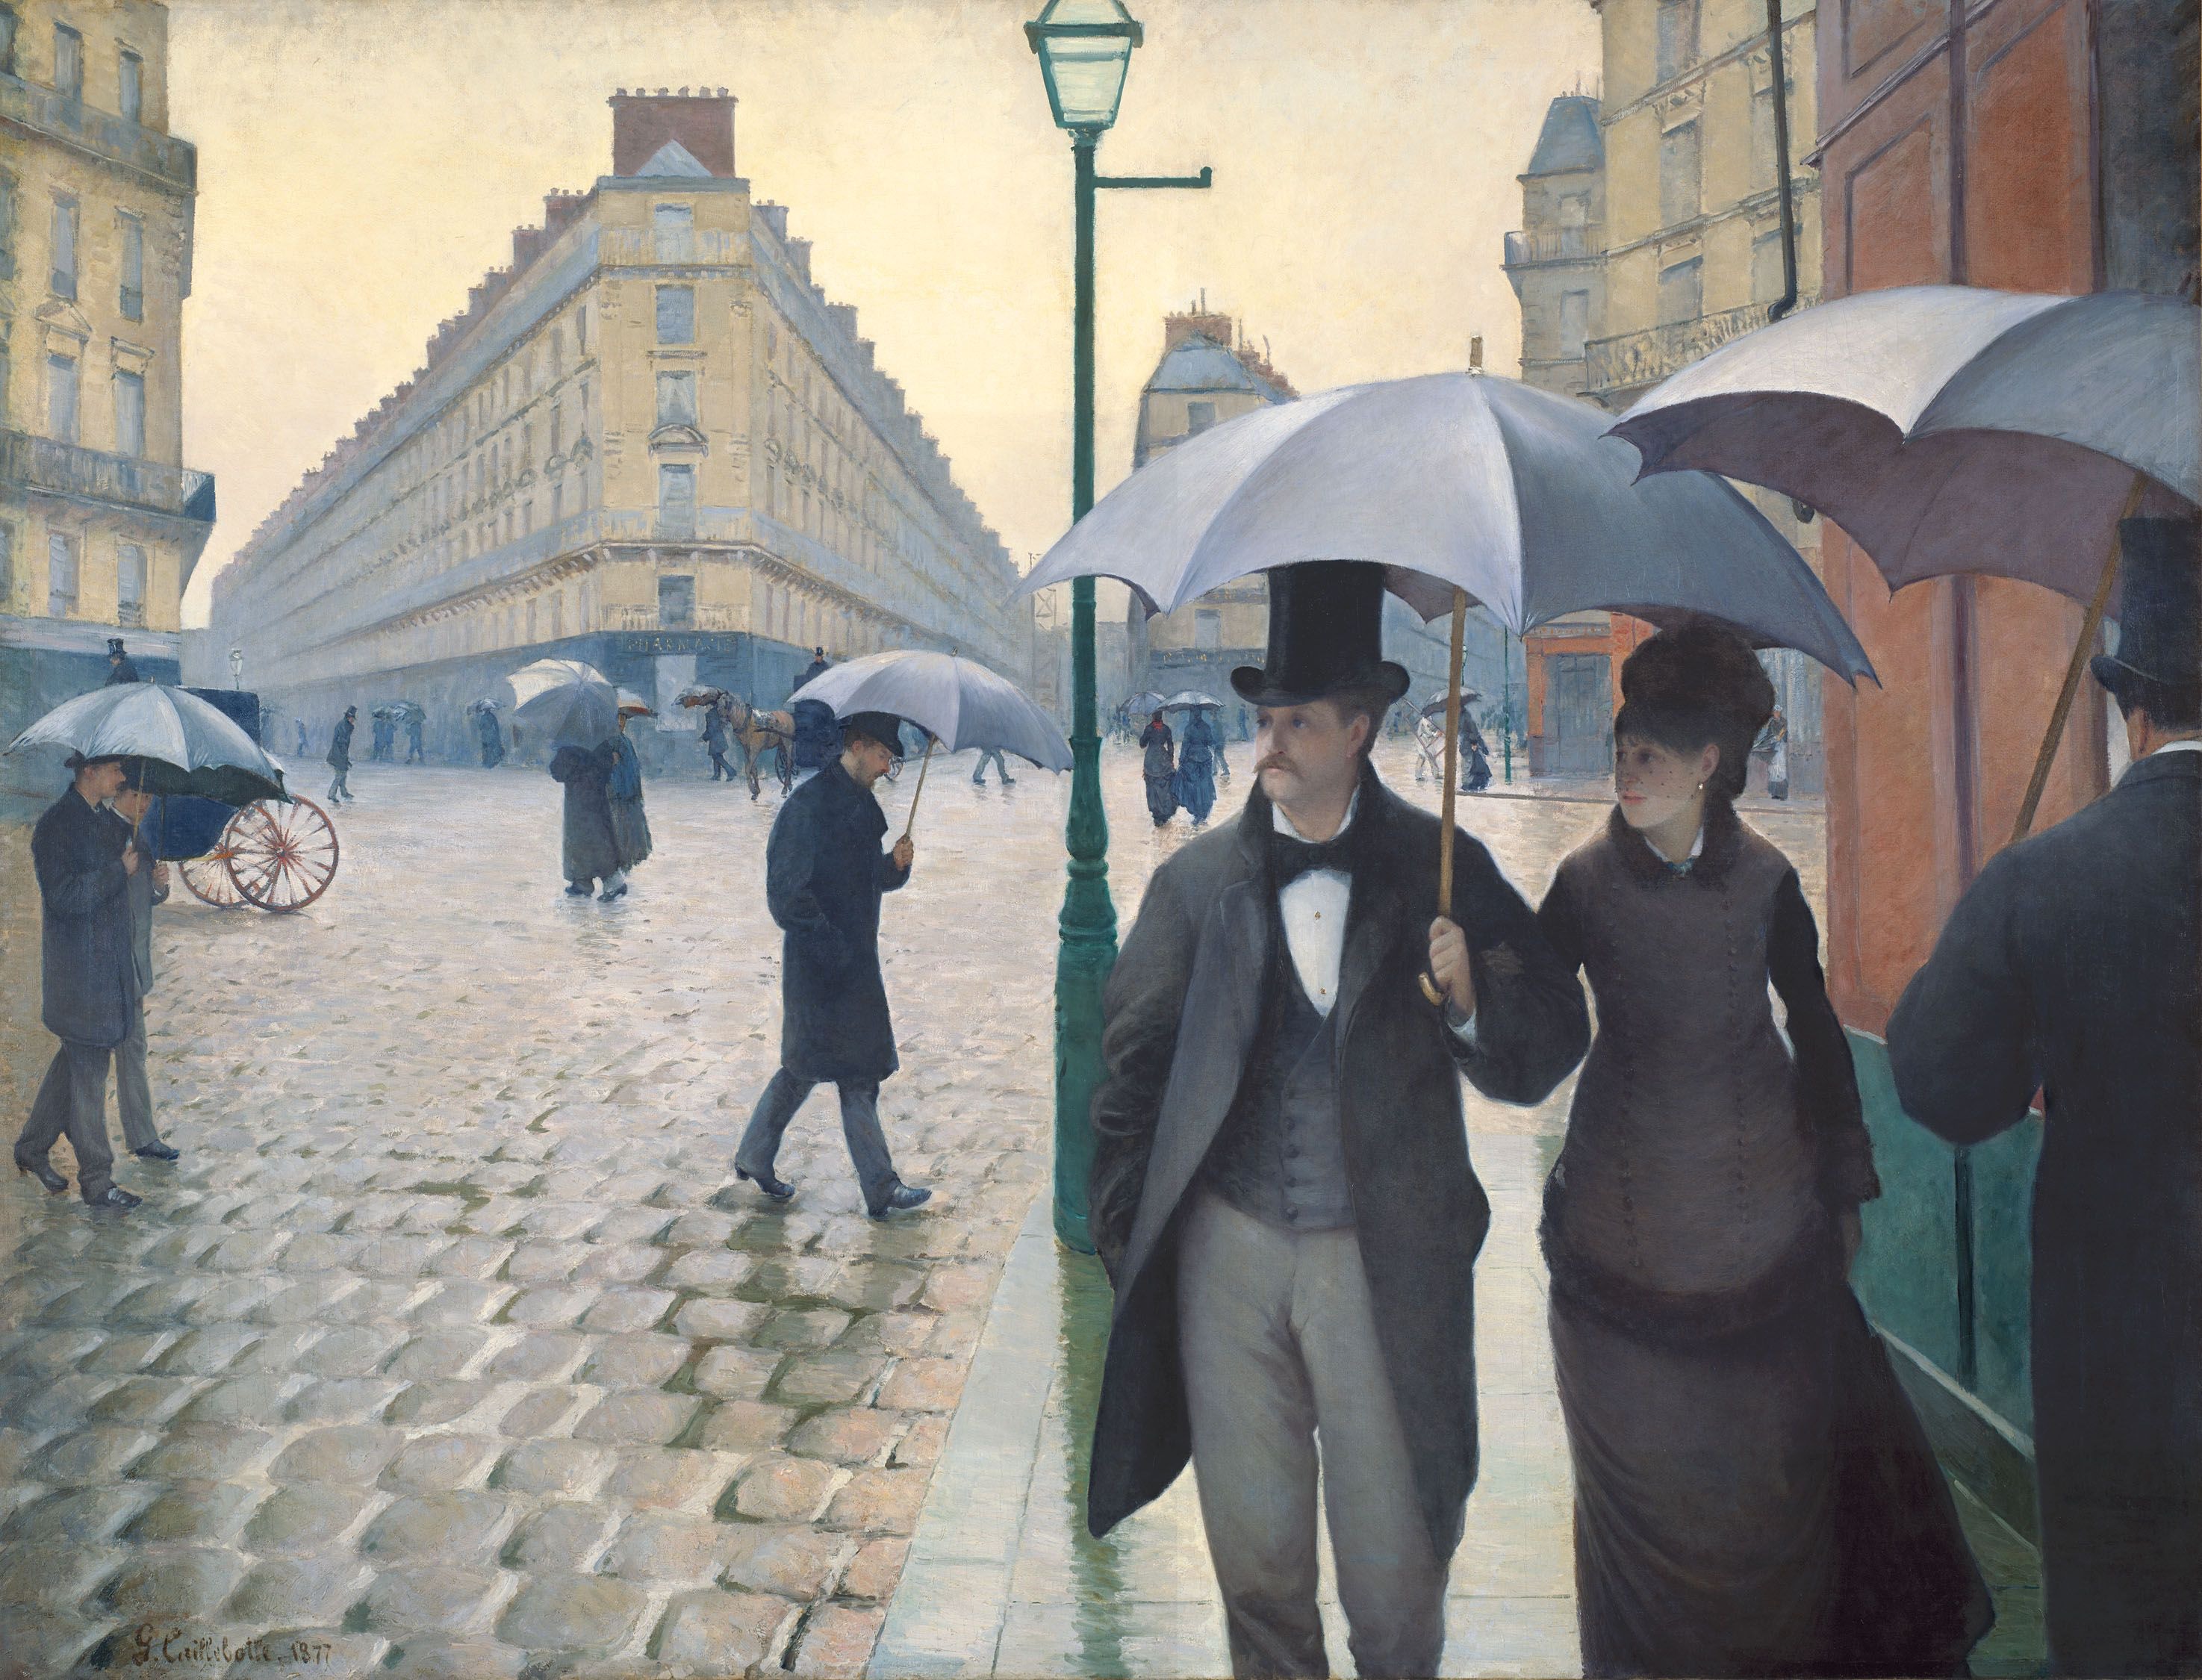 Paris Street; Rainy Day by Gustave Caillebotte - 1877 - 83 1/2 x 108 3/4in Art Institute of Chicago